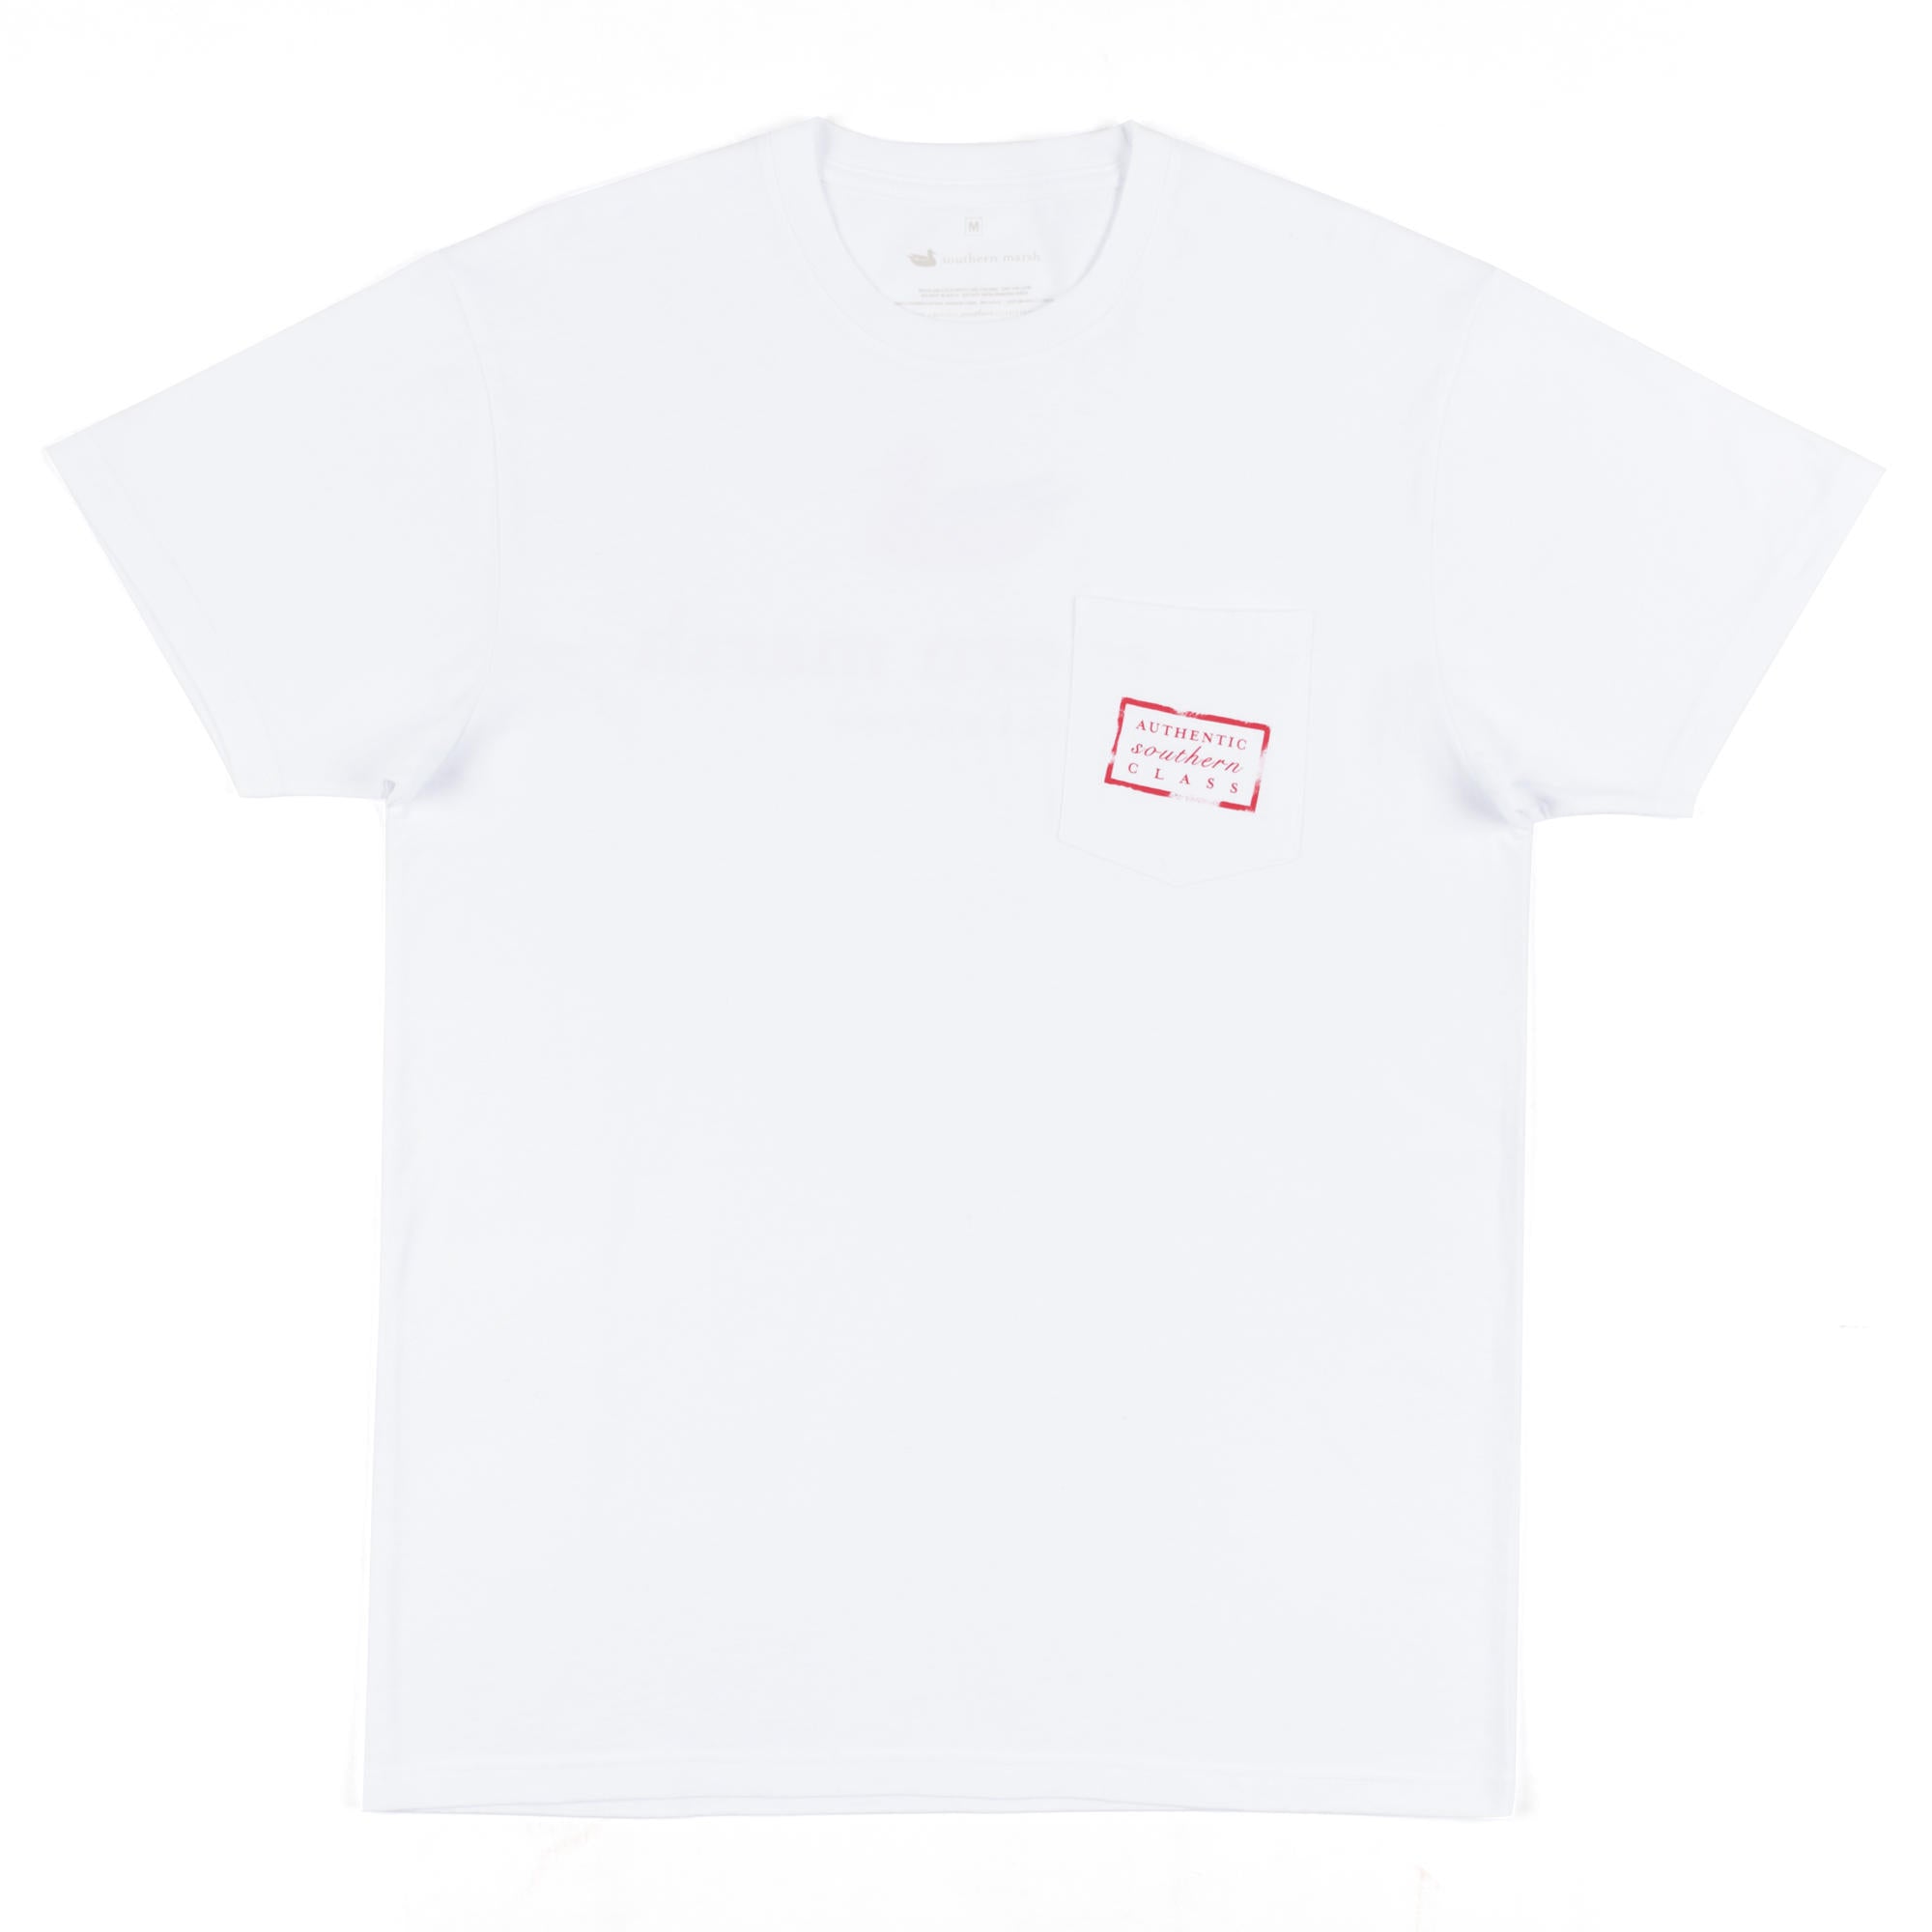 Authentic Flag Tee in White by Southern Marsh - Country Club Prep